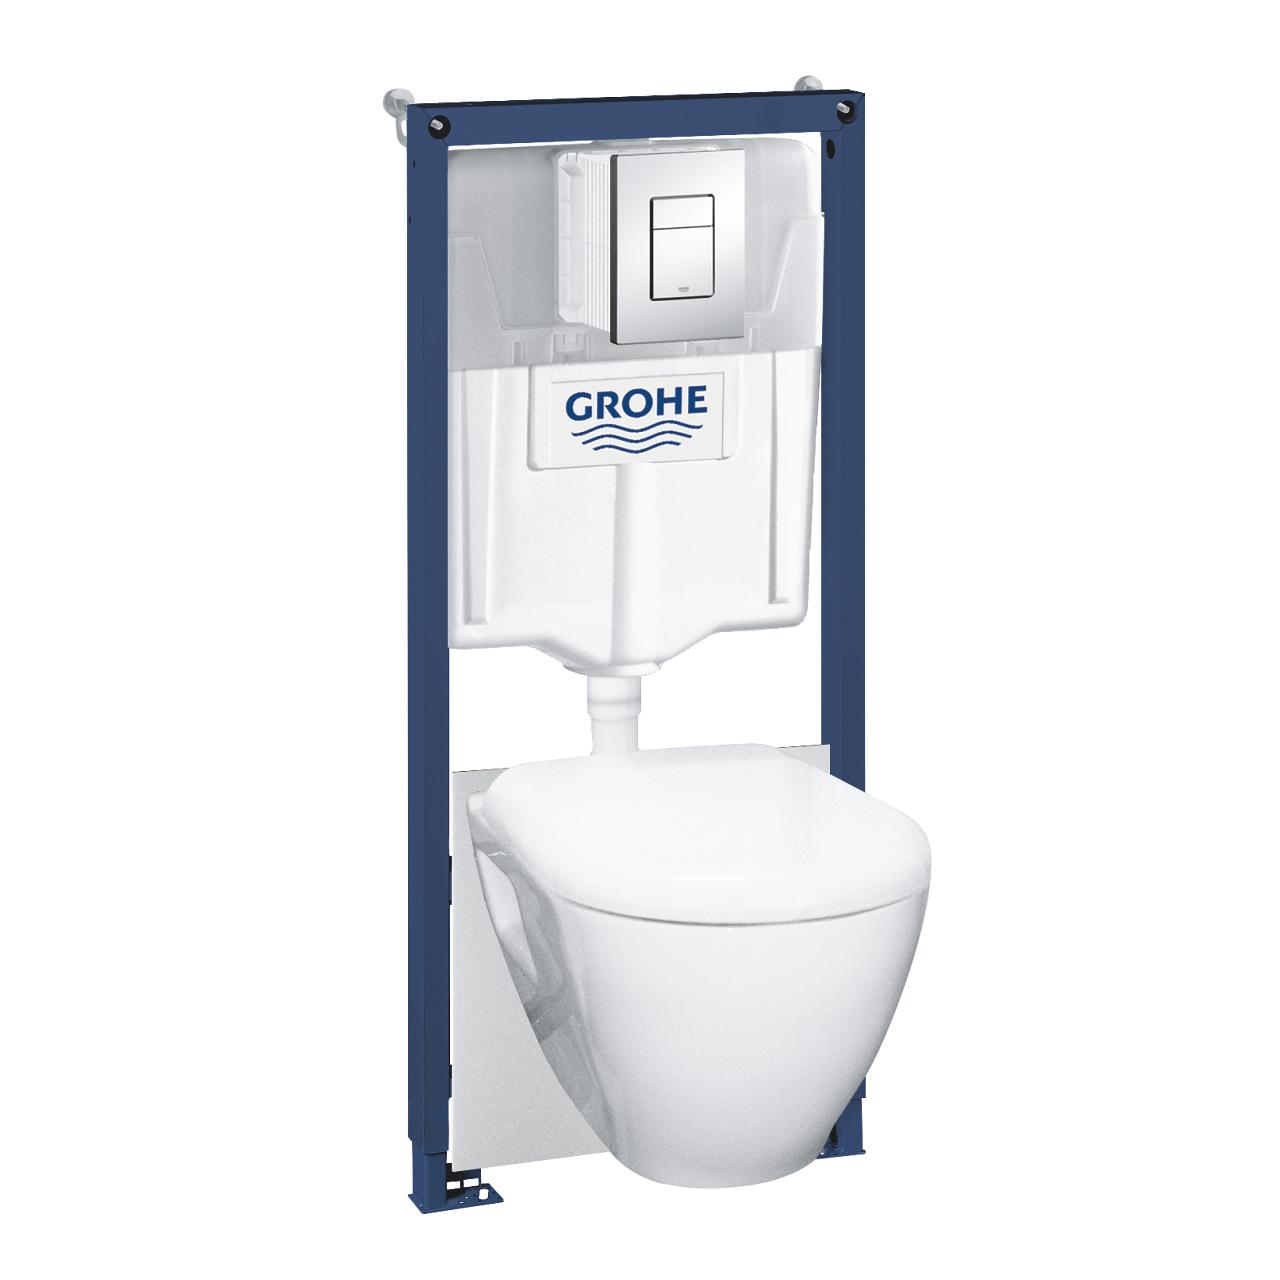 Grohe set - WC Serel with seat SC, built-in frame h=1130mm, rinsing button Skate Cosmo chrome, brackets, gasket, 39468000 cover photo